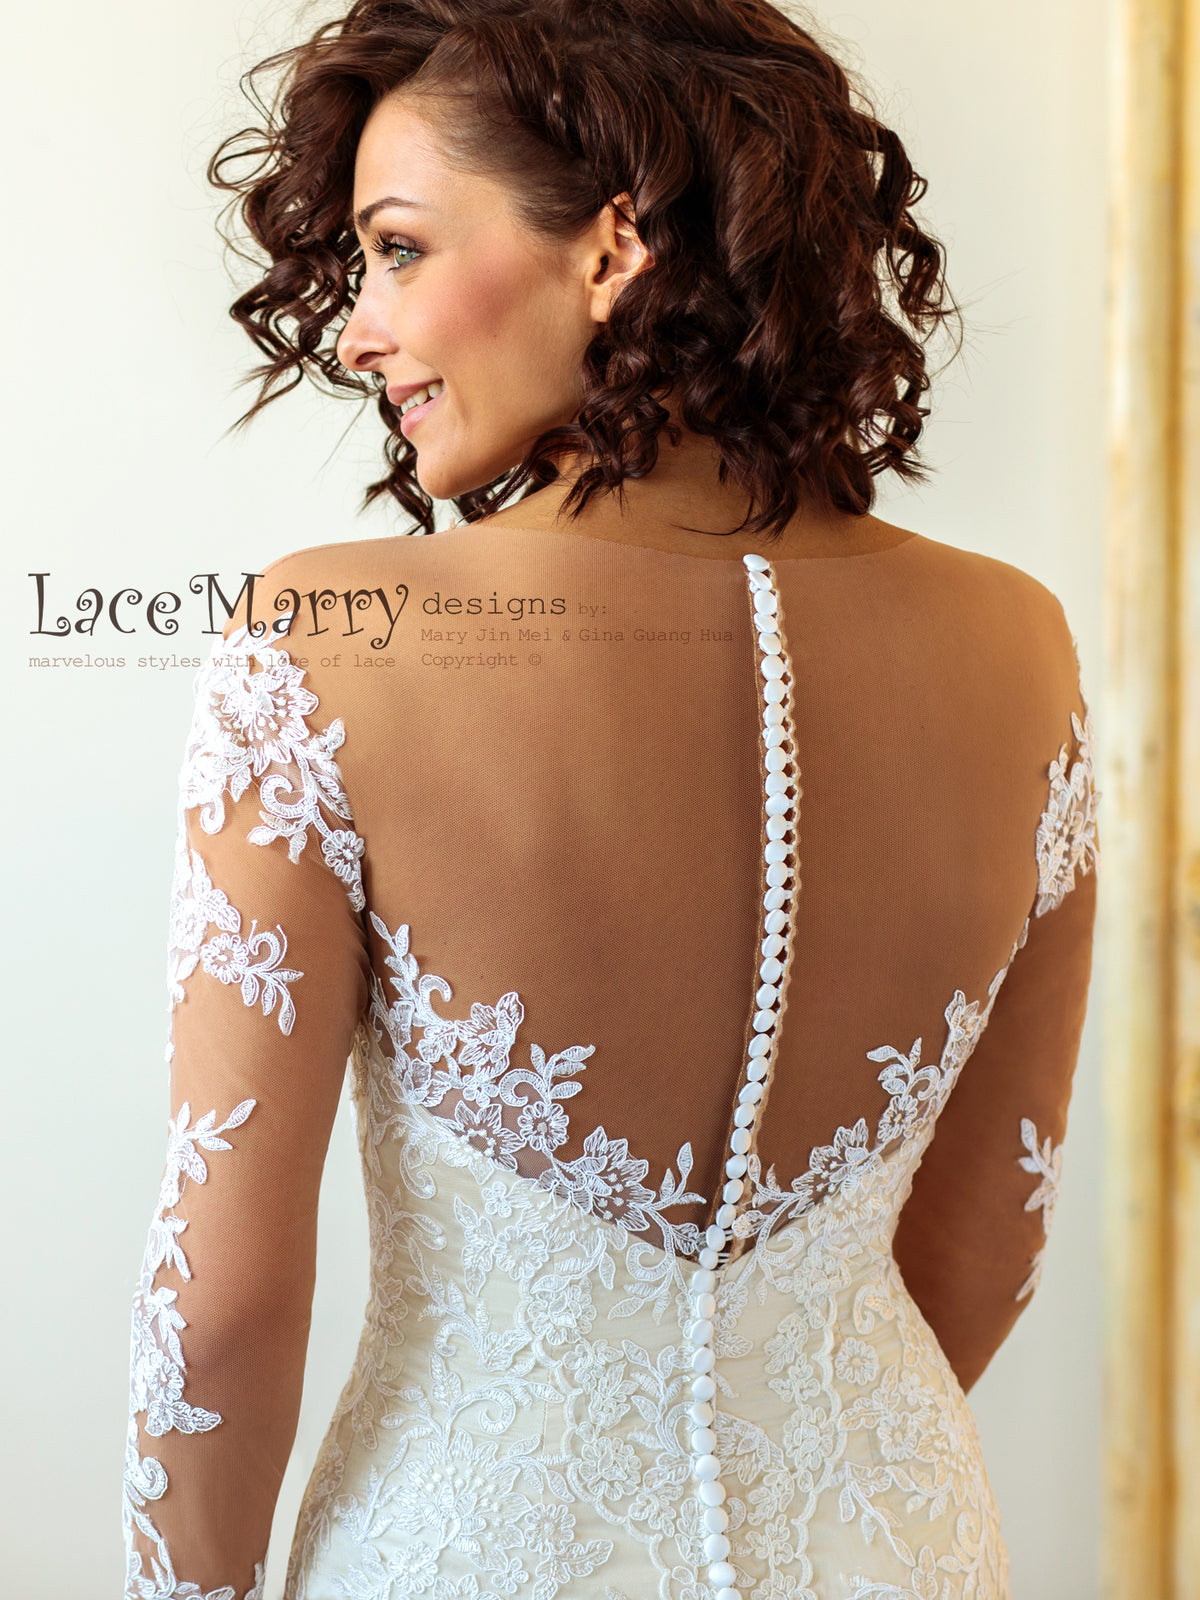 Gorgeous Illusion Back Wedding Dress with Long Sleeves